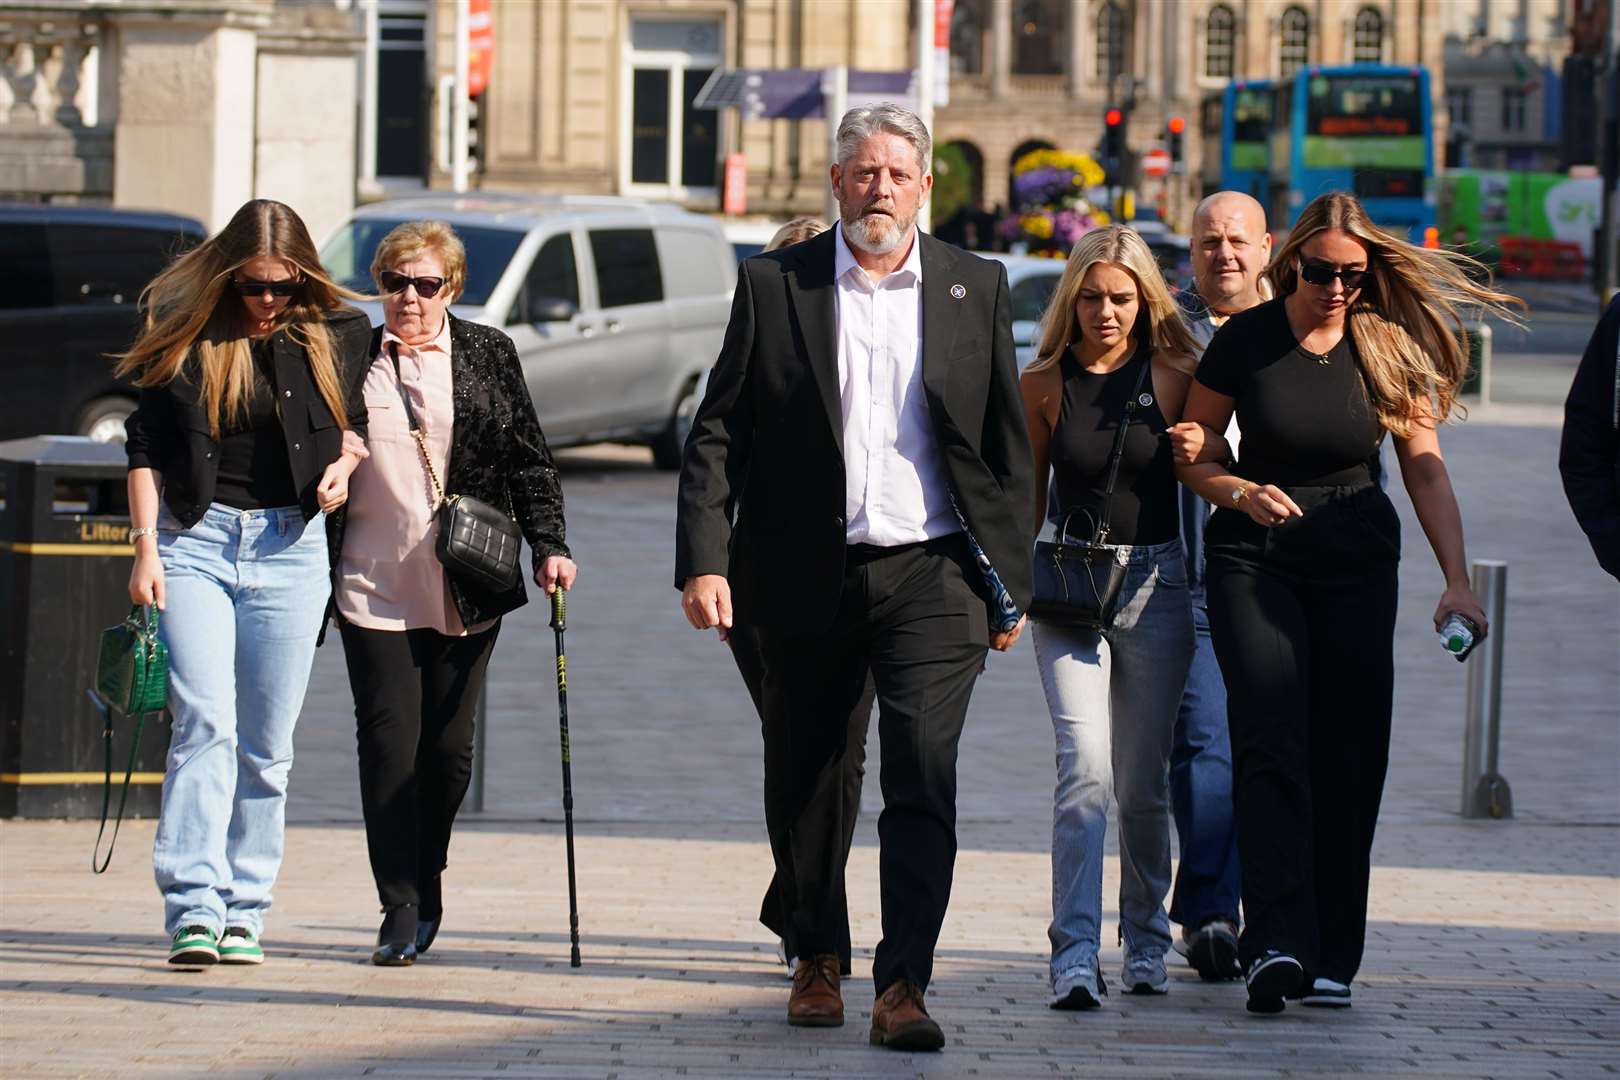 The father of Elle Edwards, Tim Edwards, arrives with family members at Liverpool Crown Court where Connor Chapman is charged with her murder (Peter Byrne/PA)